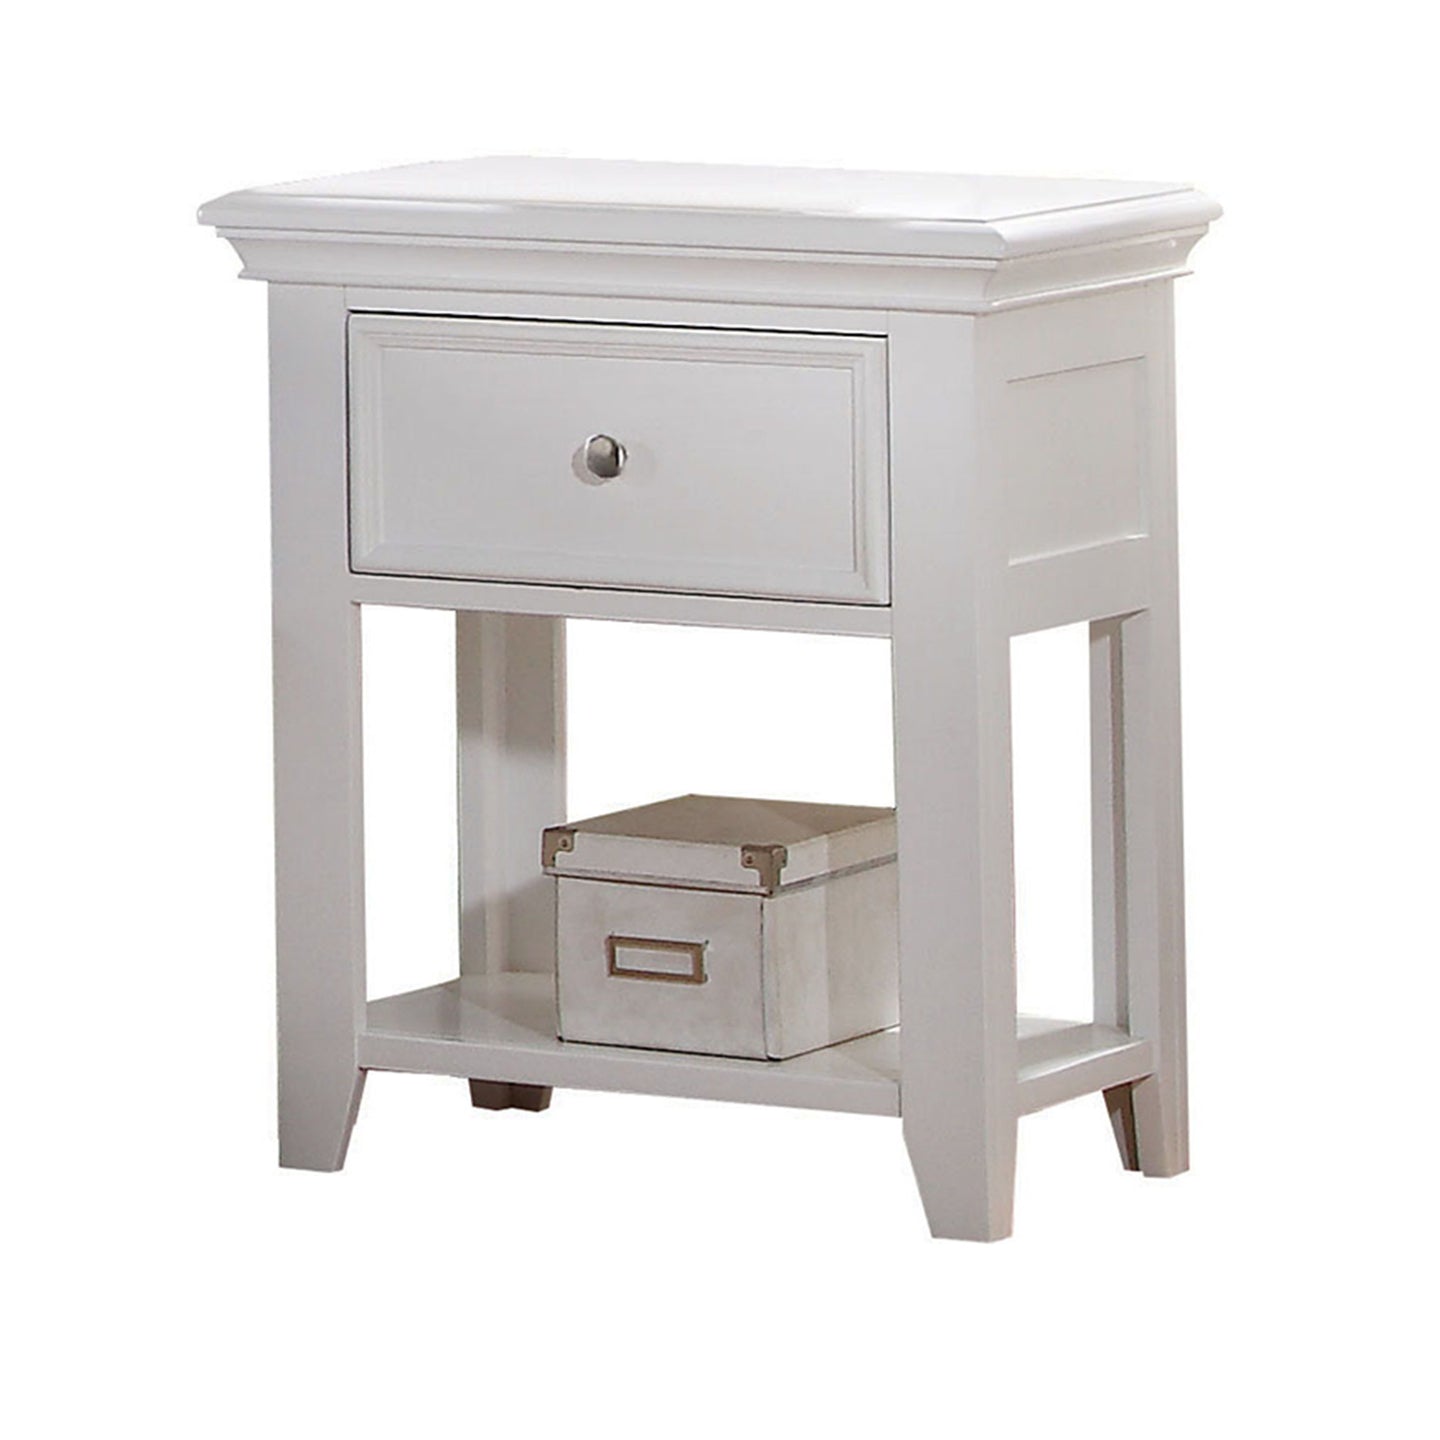 Lacey White Nightstand (1 DRAWER)